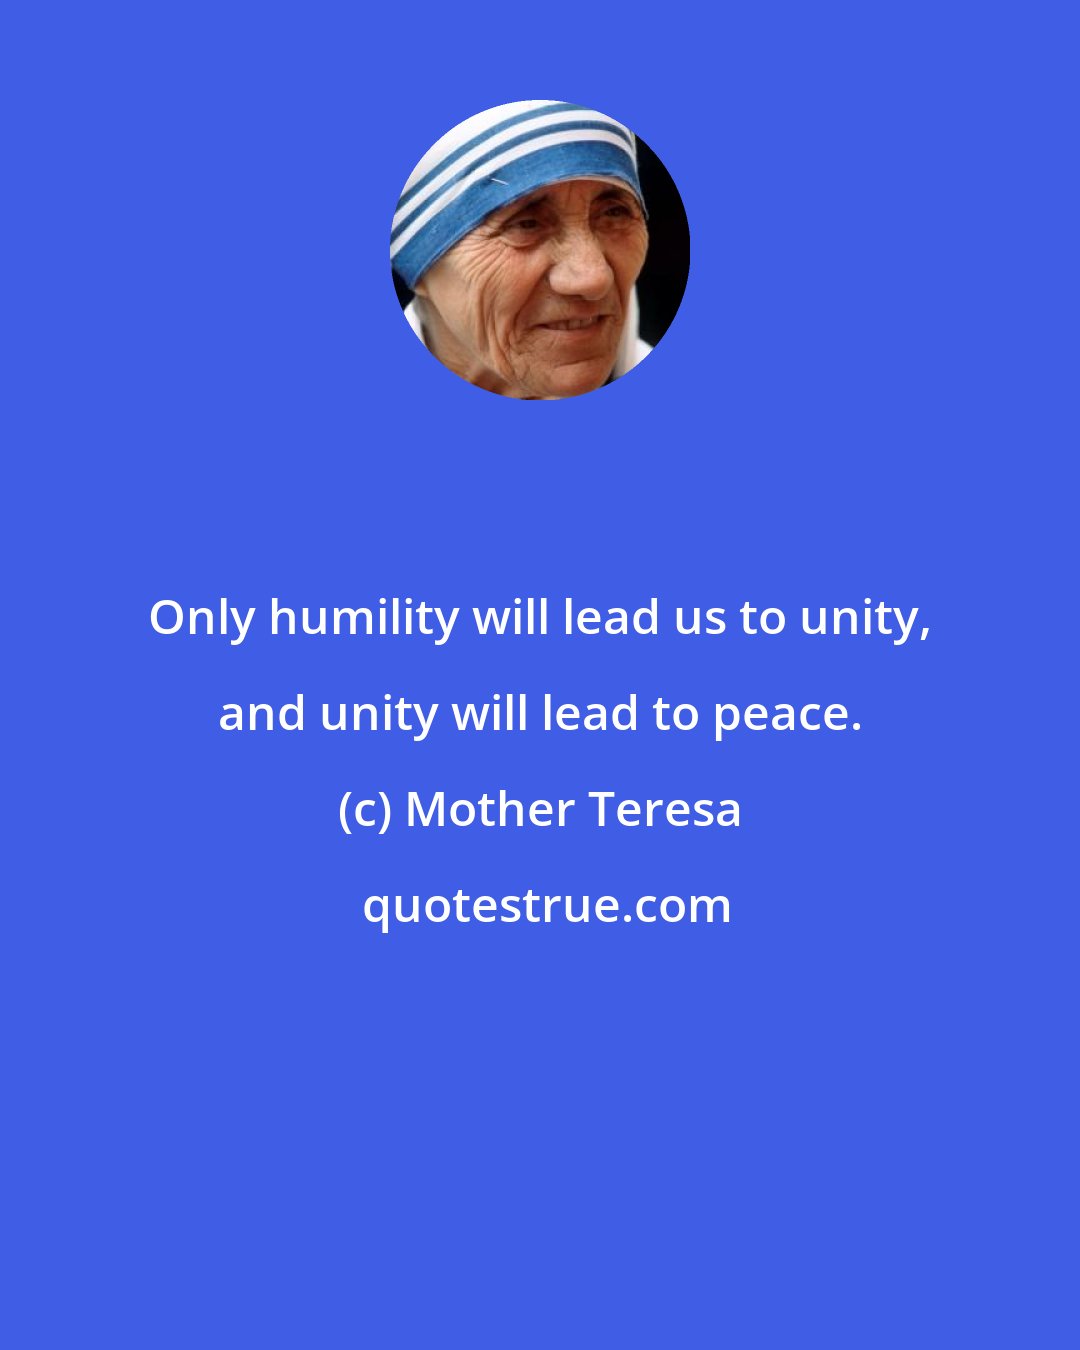 Mother Teresa: Only humility will lead us to unity, and unity will lead to peace.